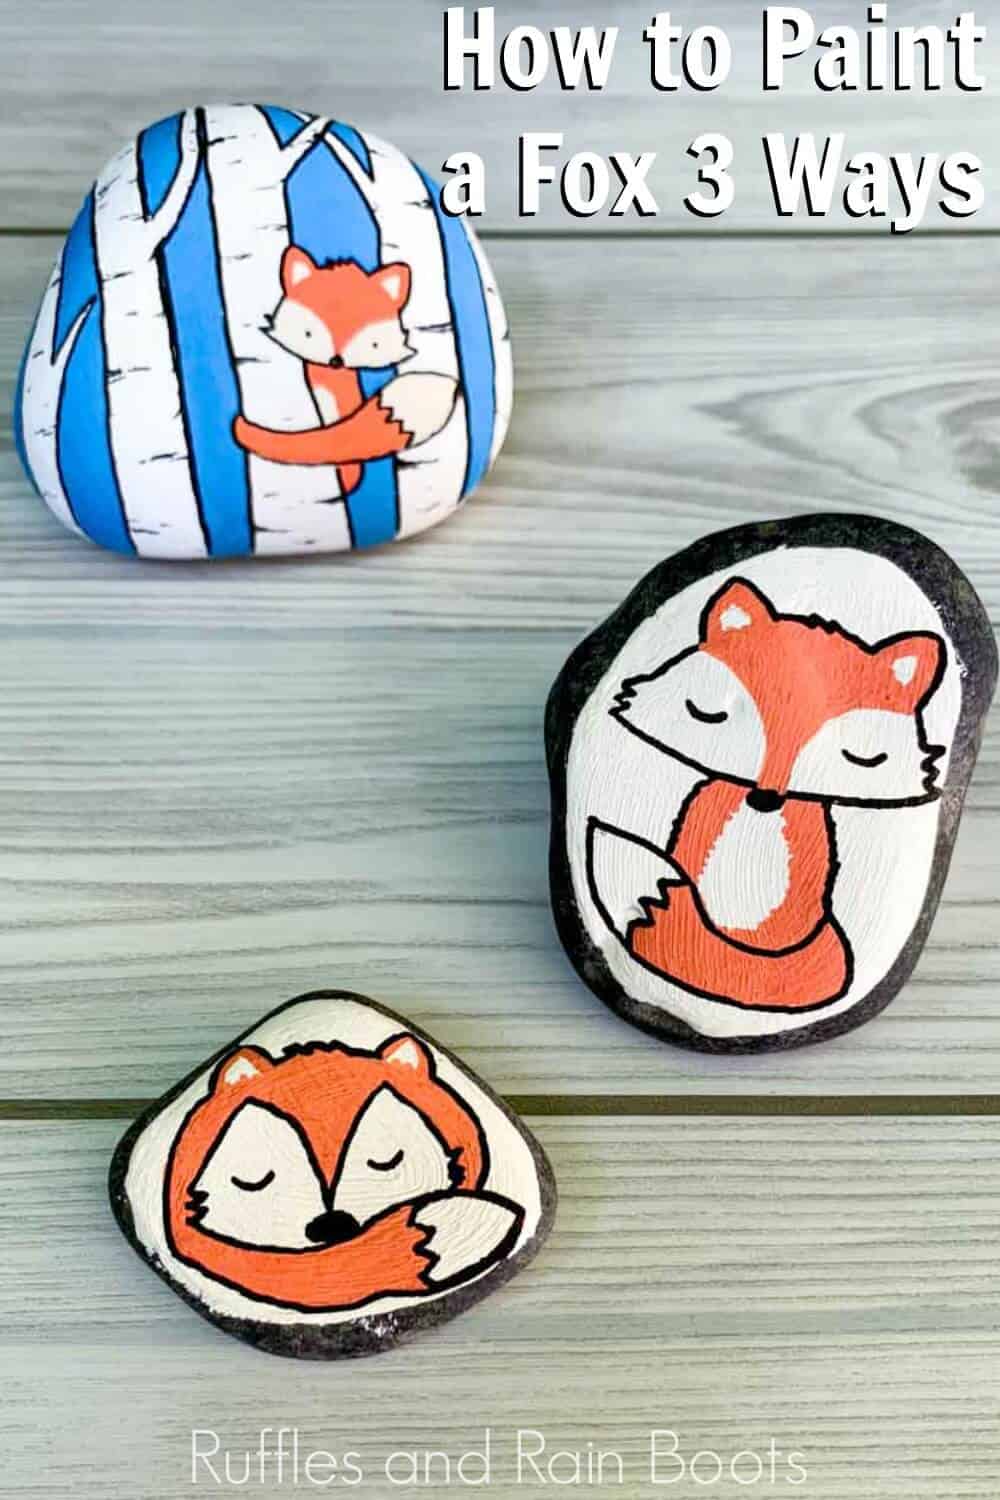 sitting fox rock painting, sleeping fox rock painting, and peek-a-boo fox in the forest rock painting on wood background